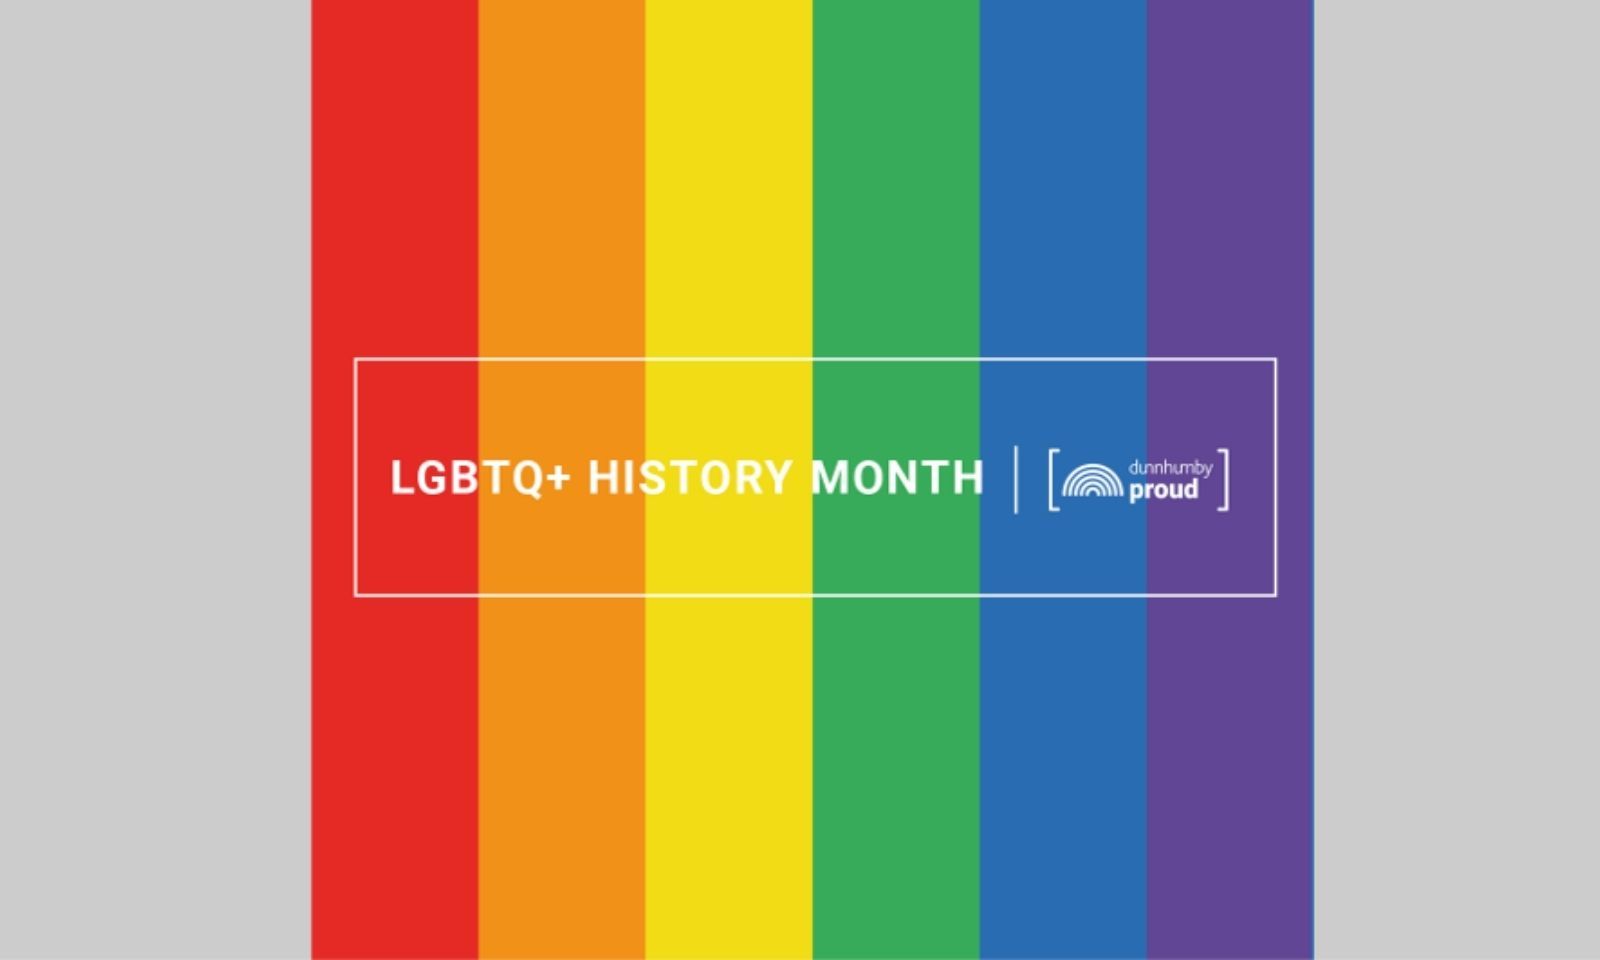 February was LGBTQ history month